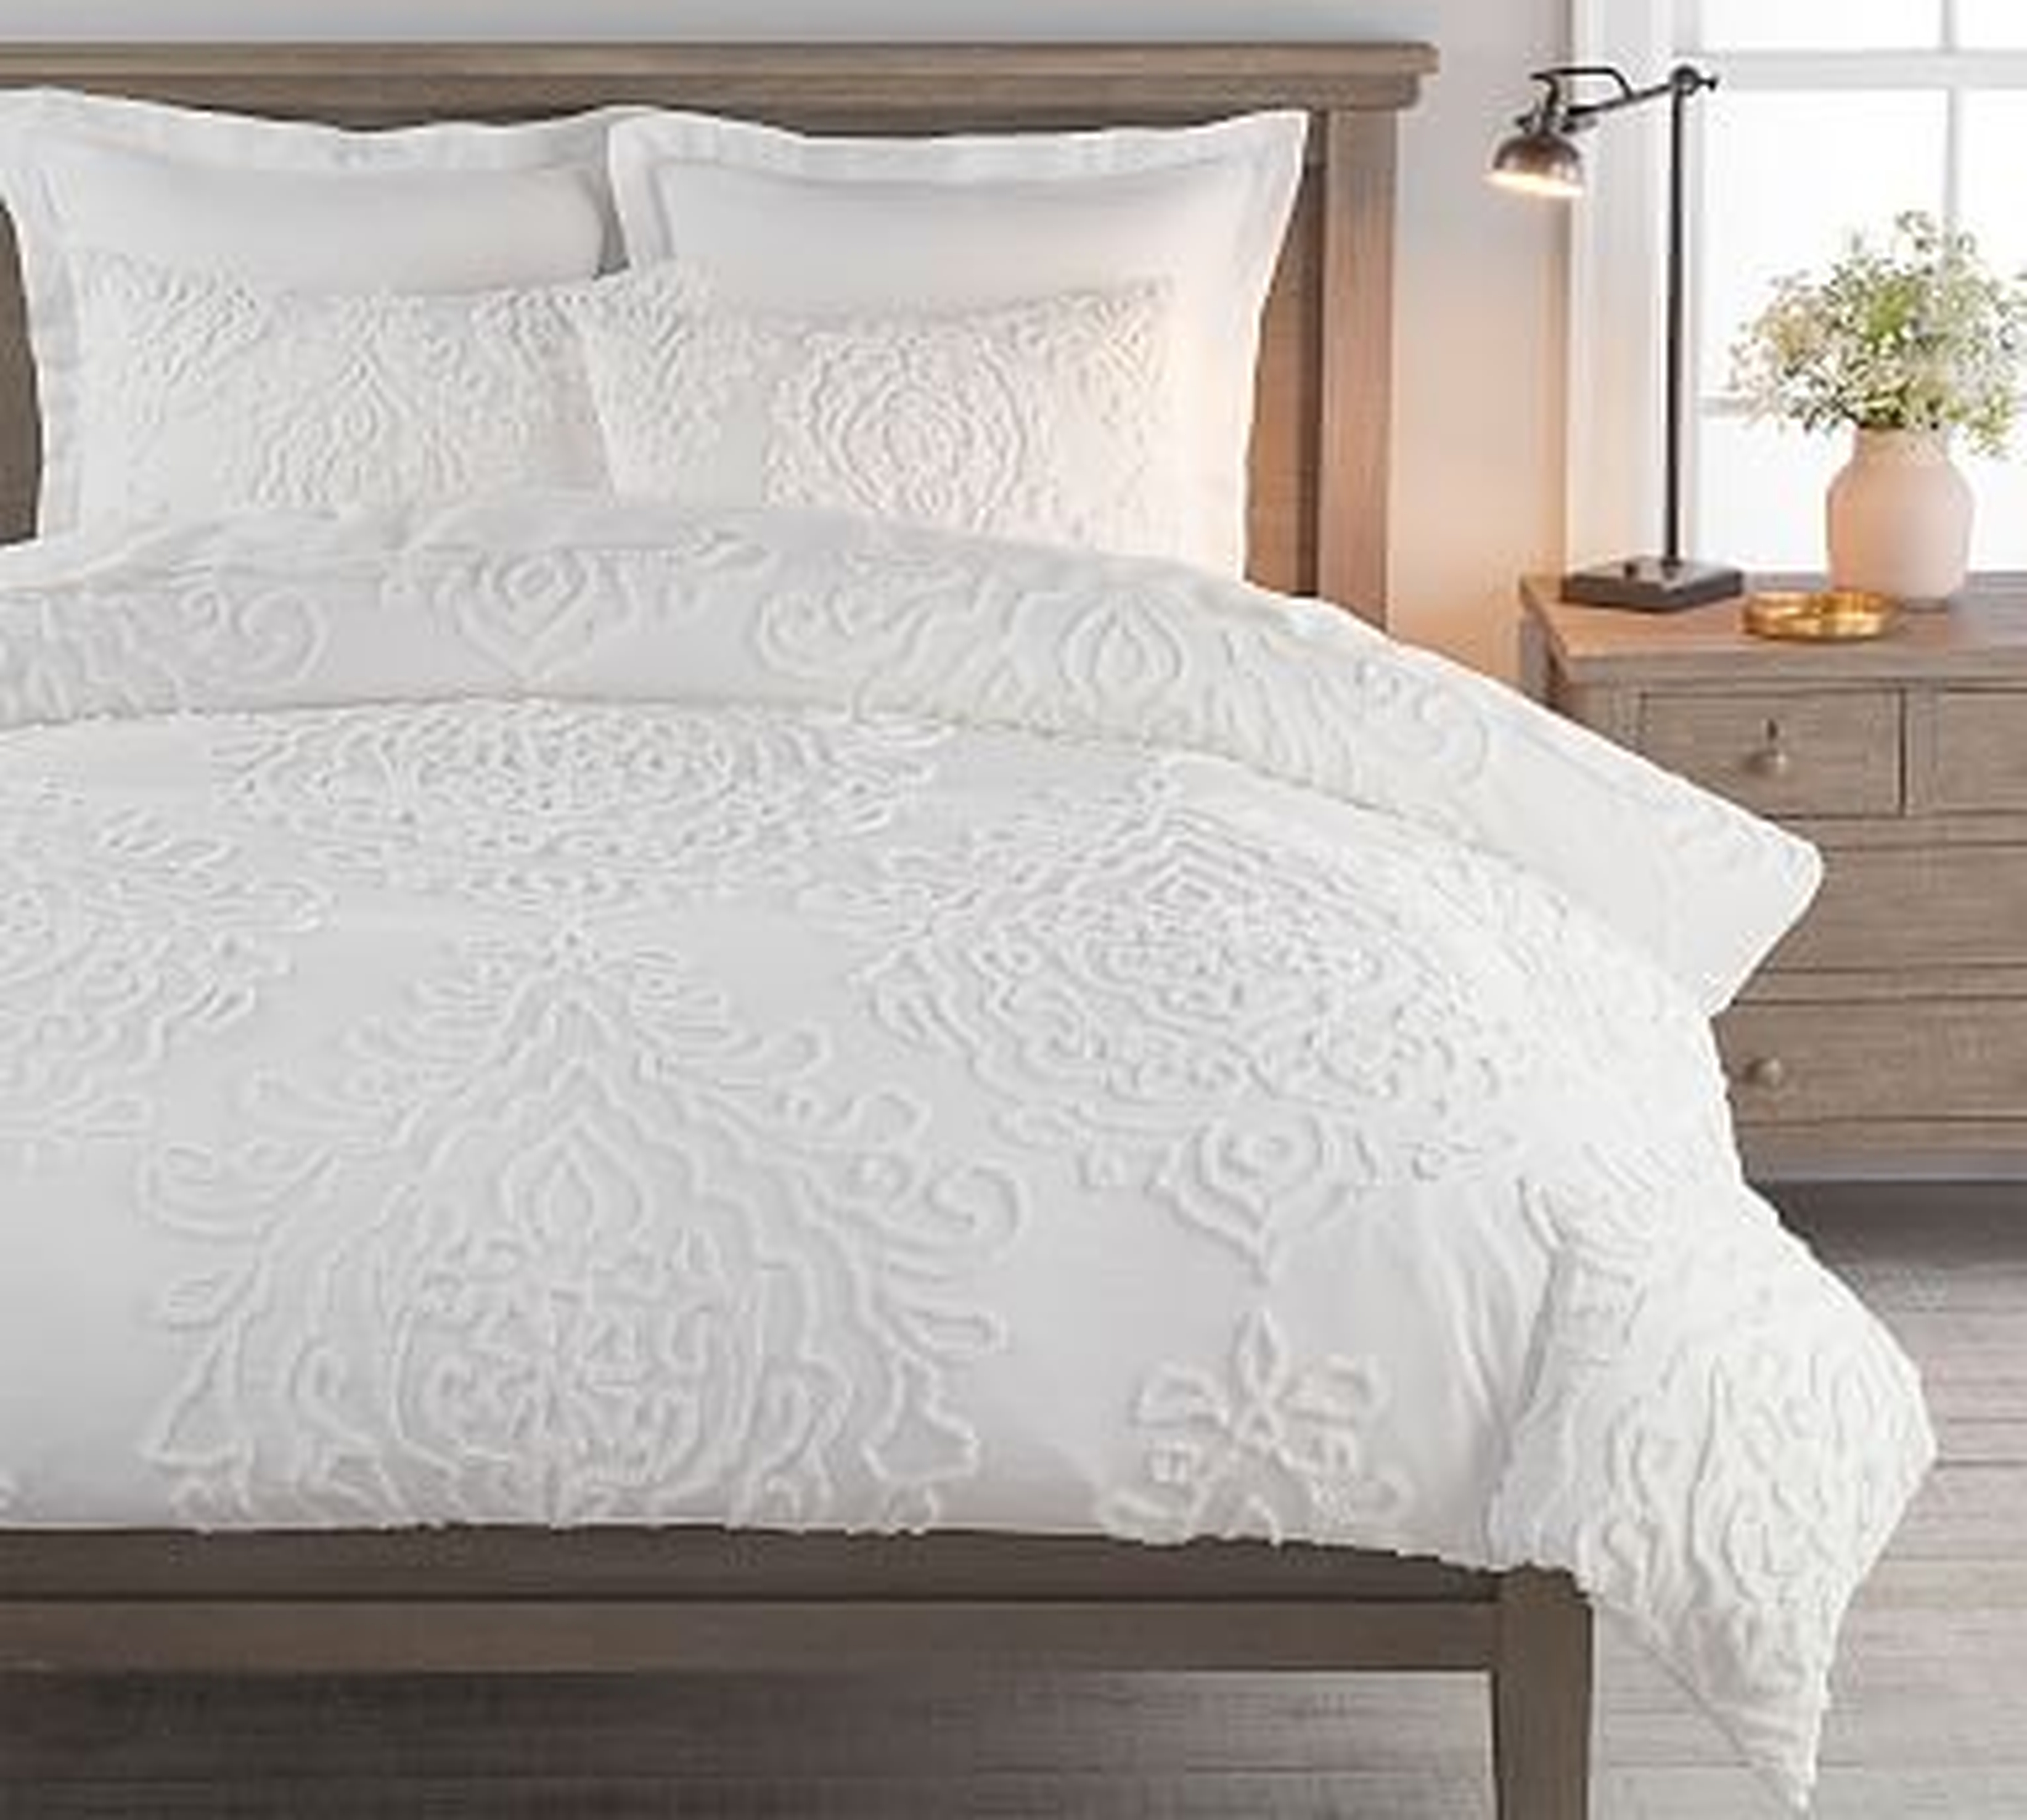 Renee Candlewick Sateen Duvet Cover, Full/Queen, White - Pottery Barn